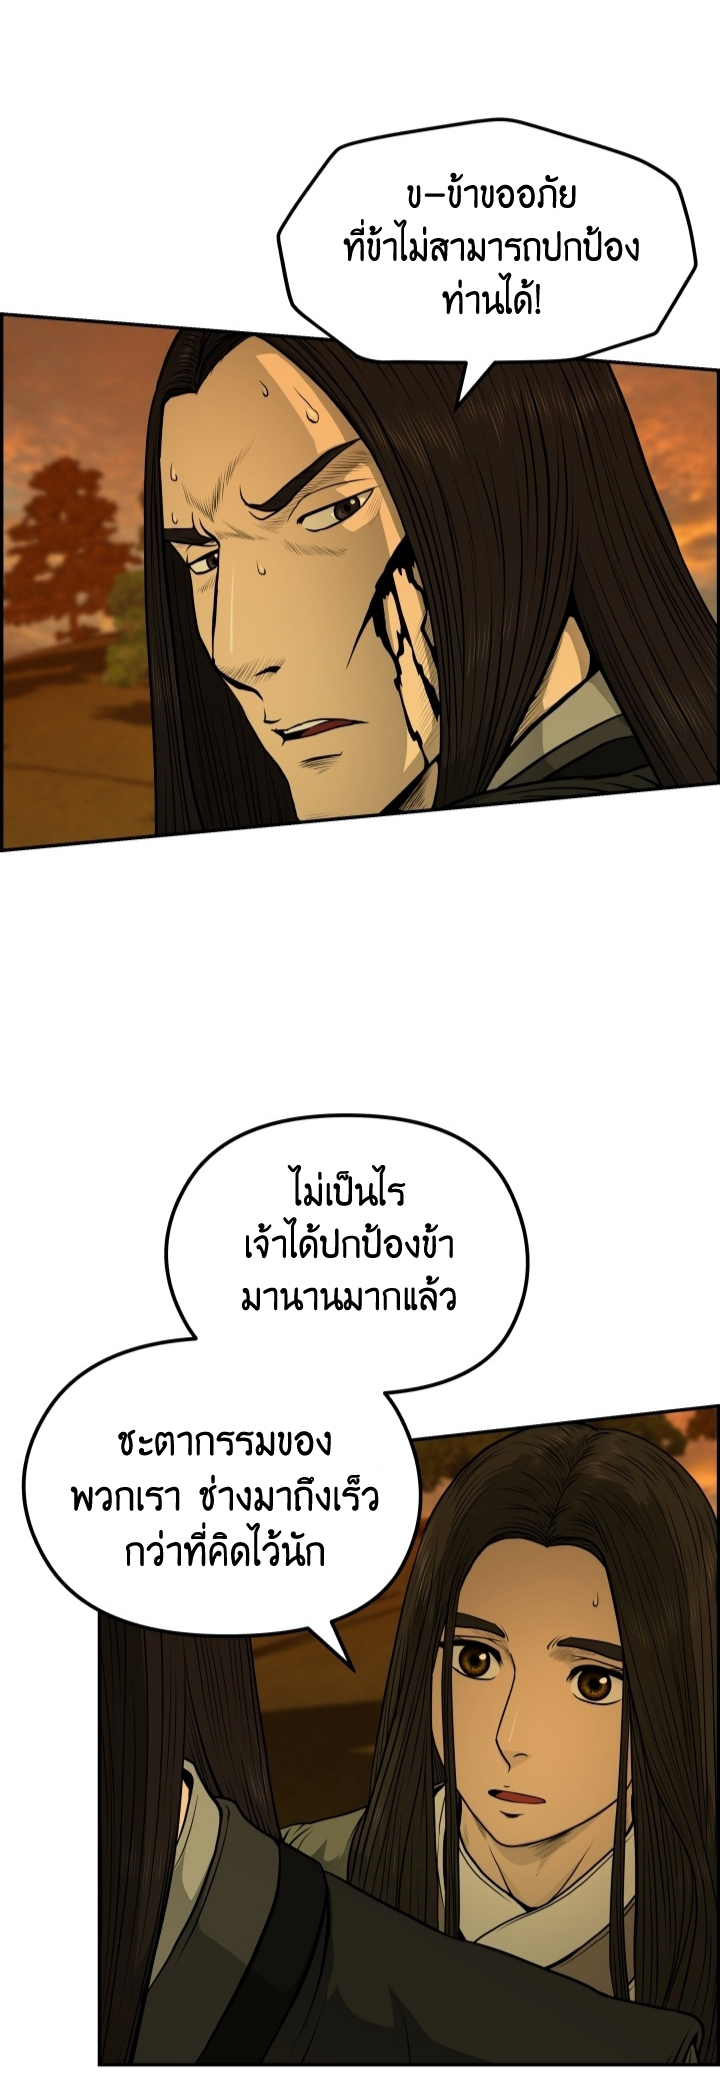 Blade of Wind and Thunder 28 (7)